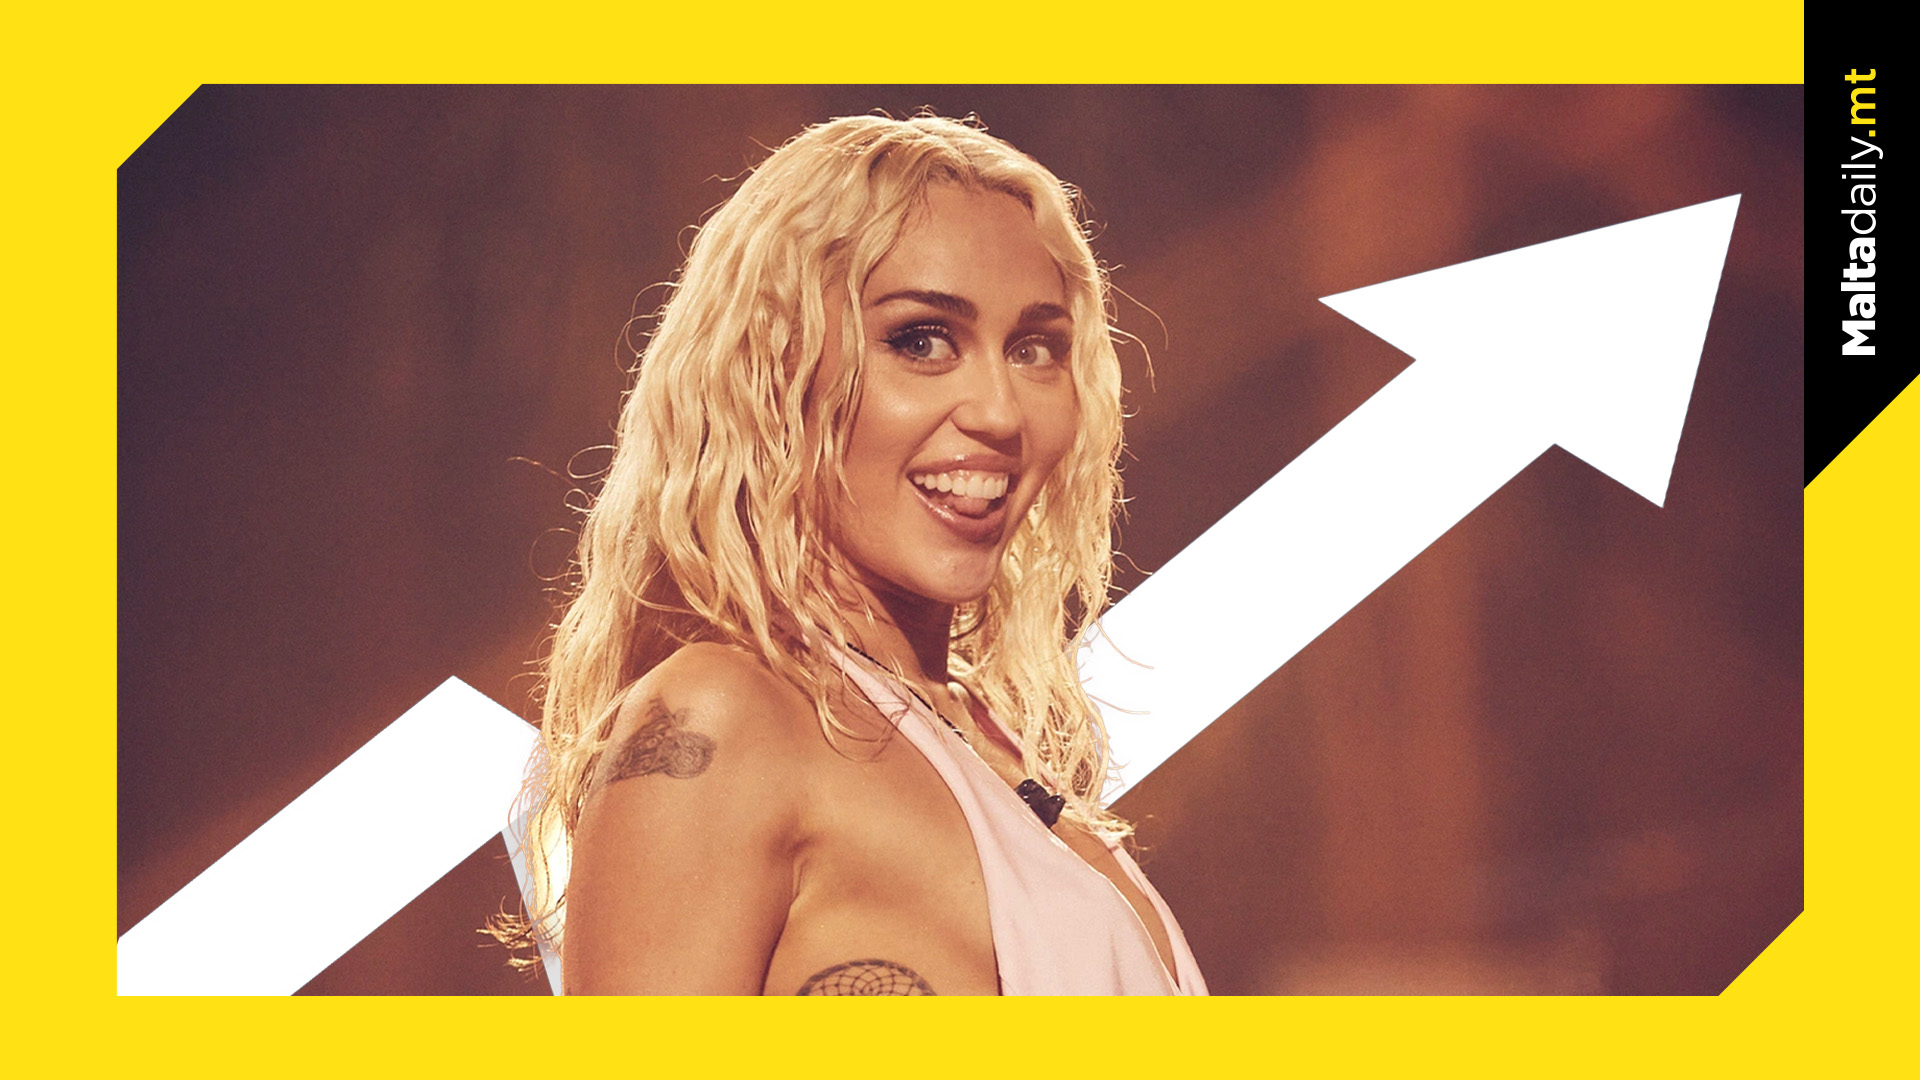 Miley Cyrus' 'Flowers' just became the fastest song to reach 100 million streams on Spotify